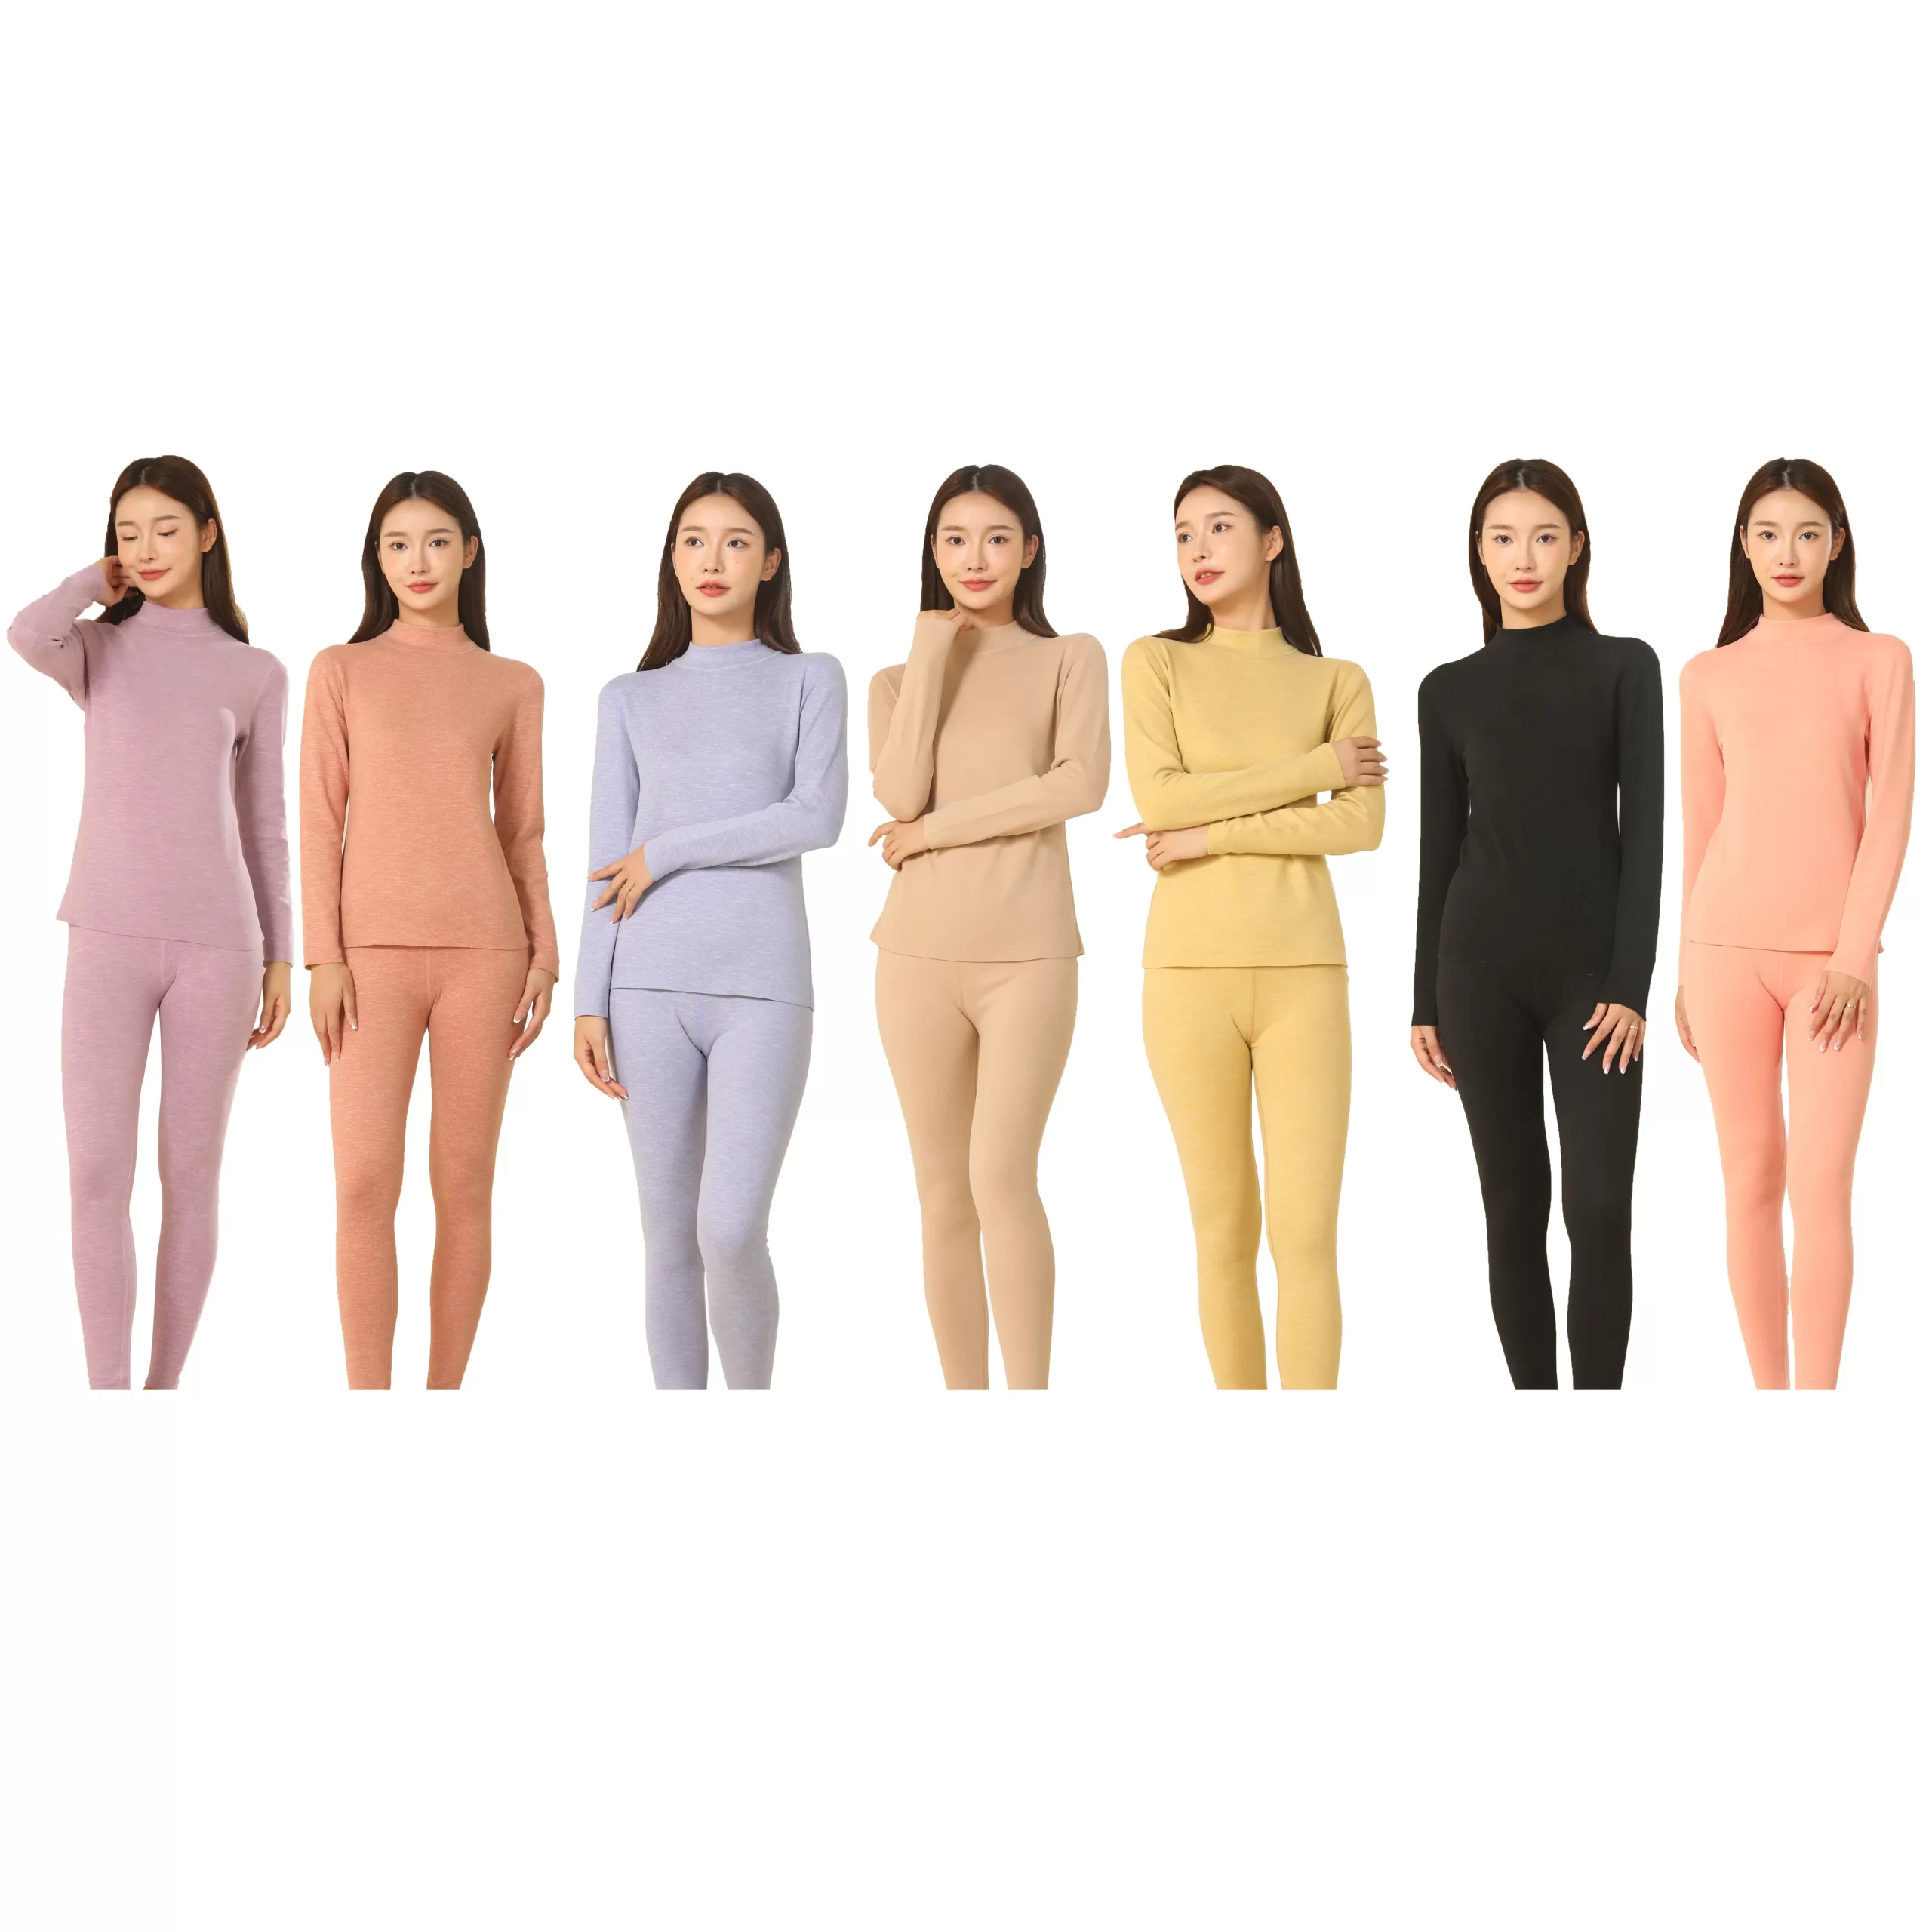 Women's Cotton Thermal Underwear Tights Set Slimming Long Johns